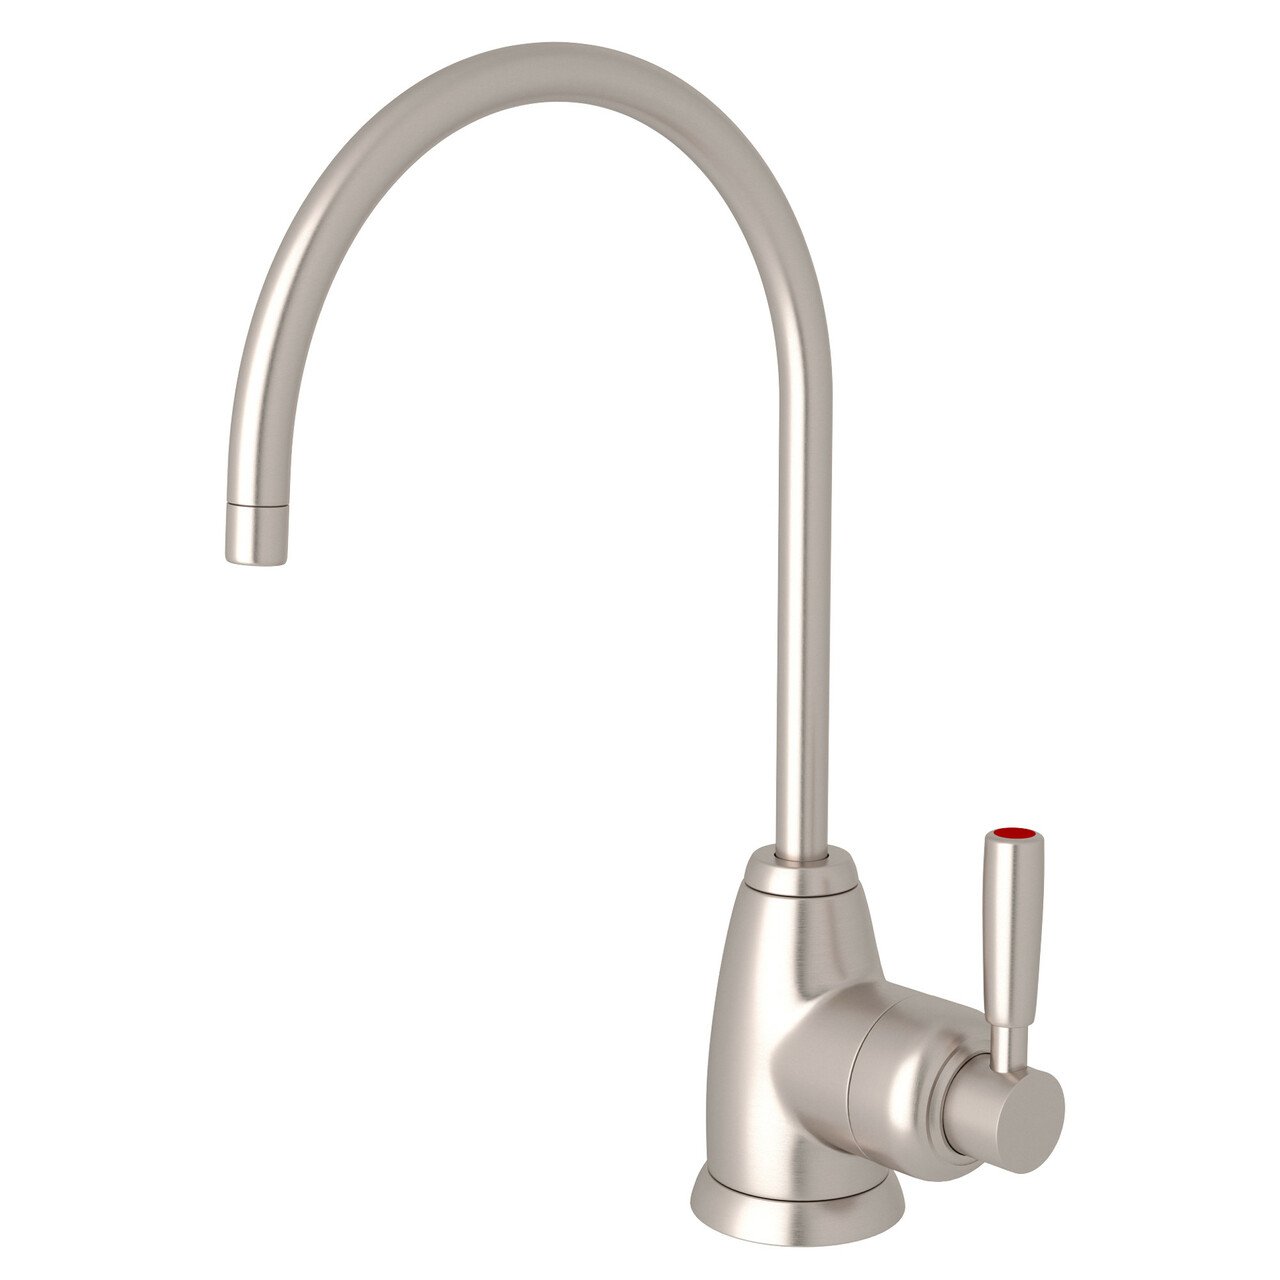 Perrin & Rowe Holborn C-Spout Hot Water Faucet - BNGBath